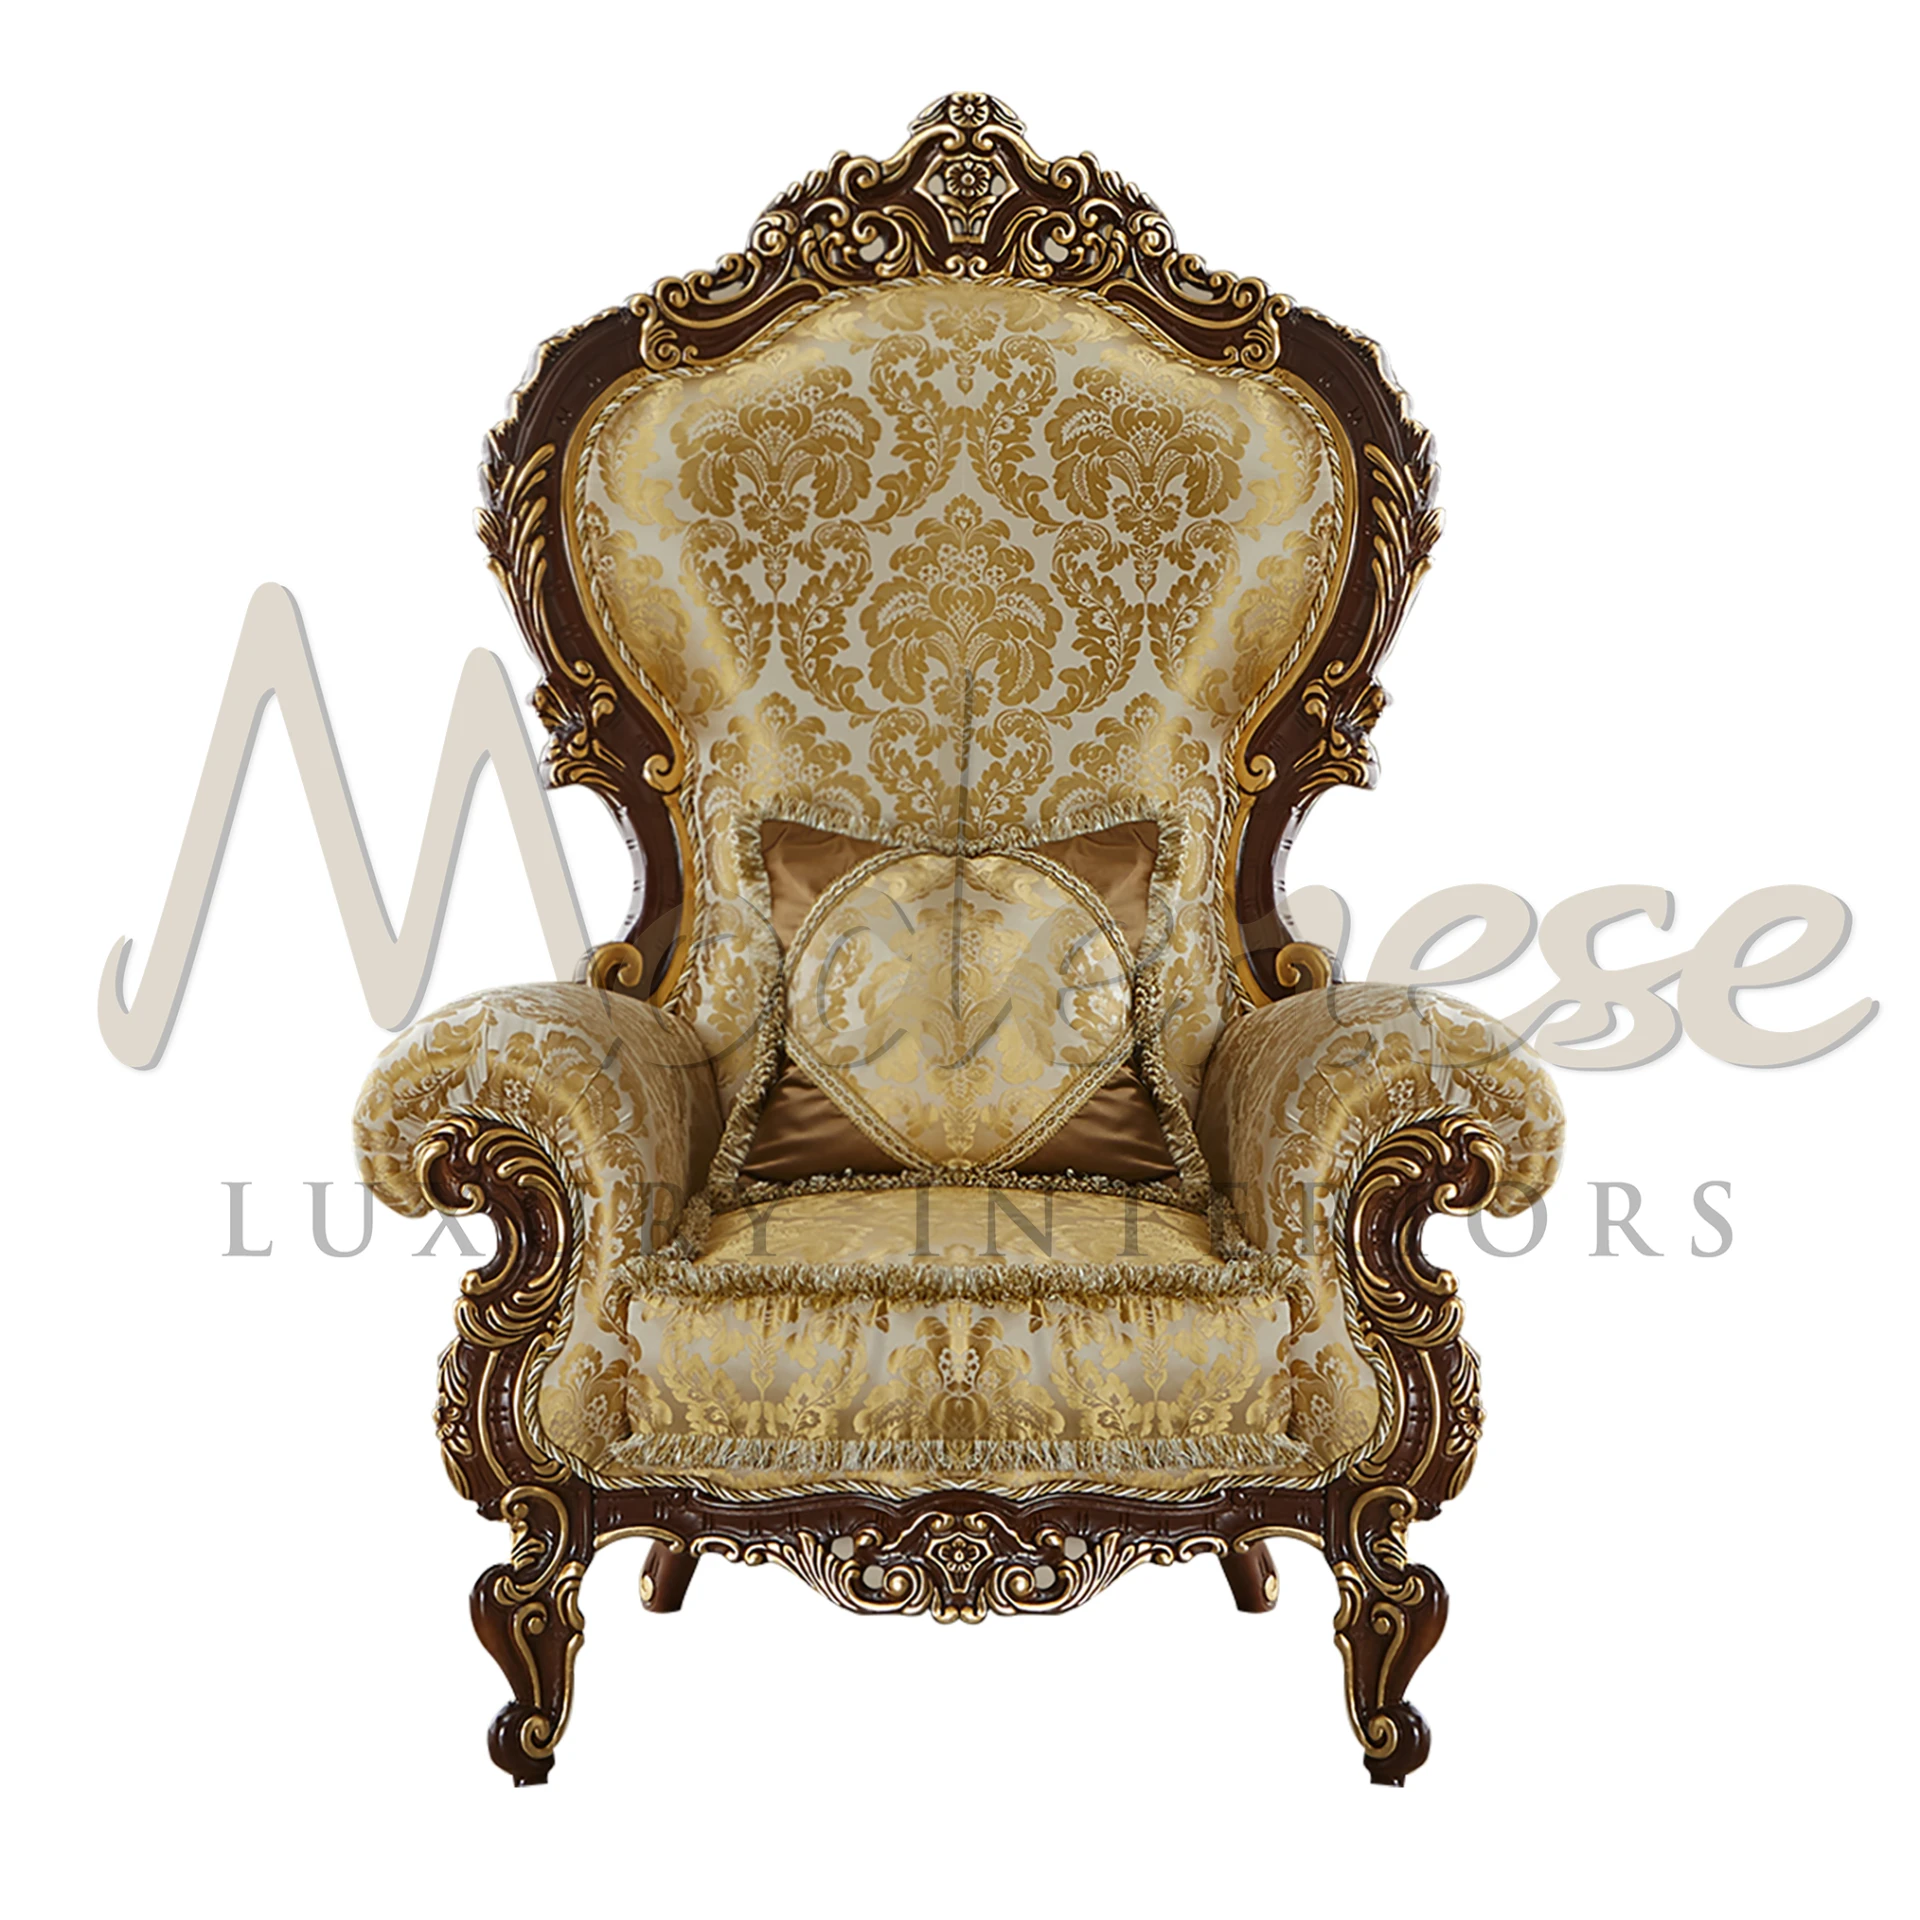 Majestic Golden Rococo Armchair with luxurious golden leaf upholstery and solid wood frame, embodying Venetian elegance.